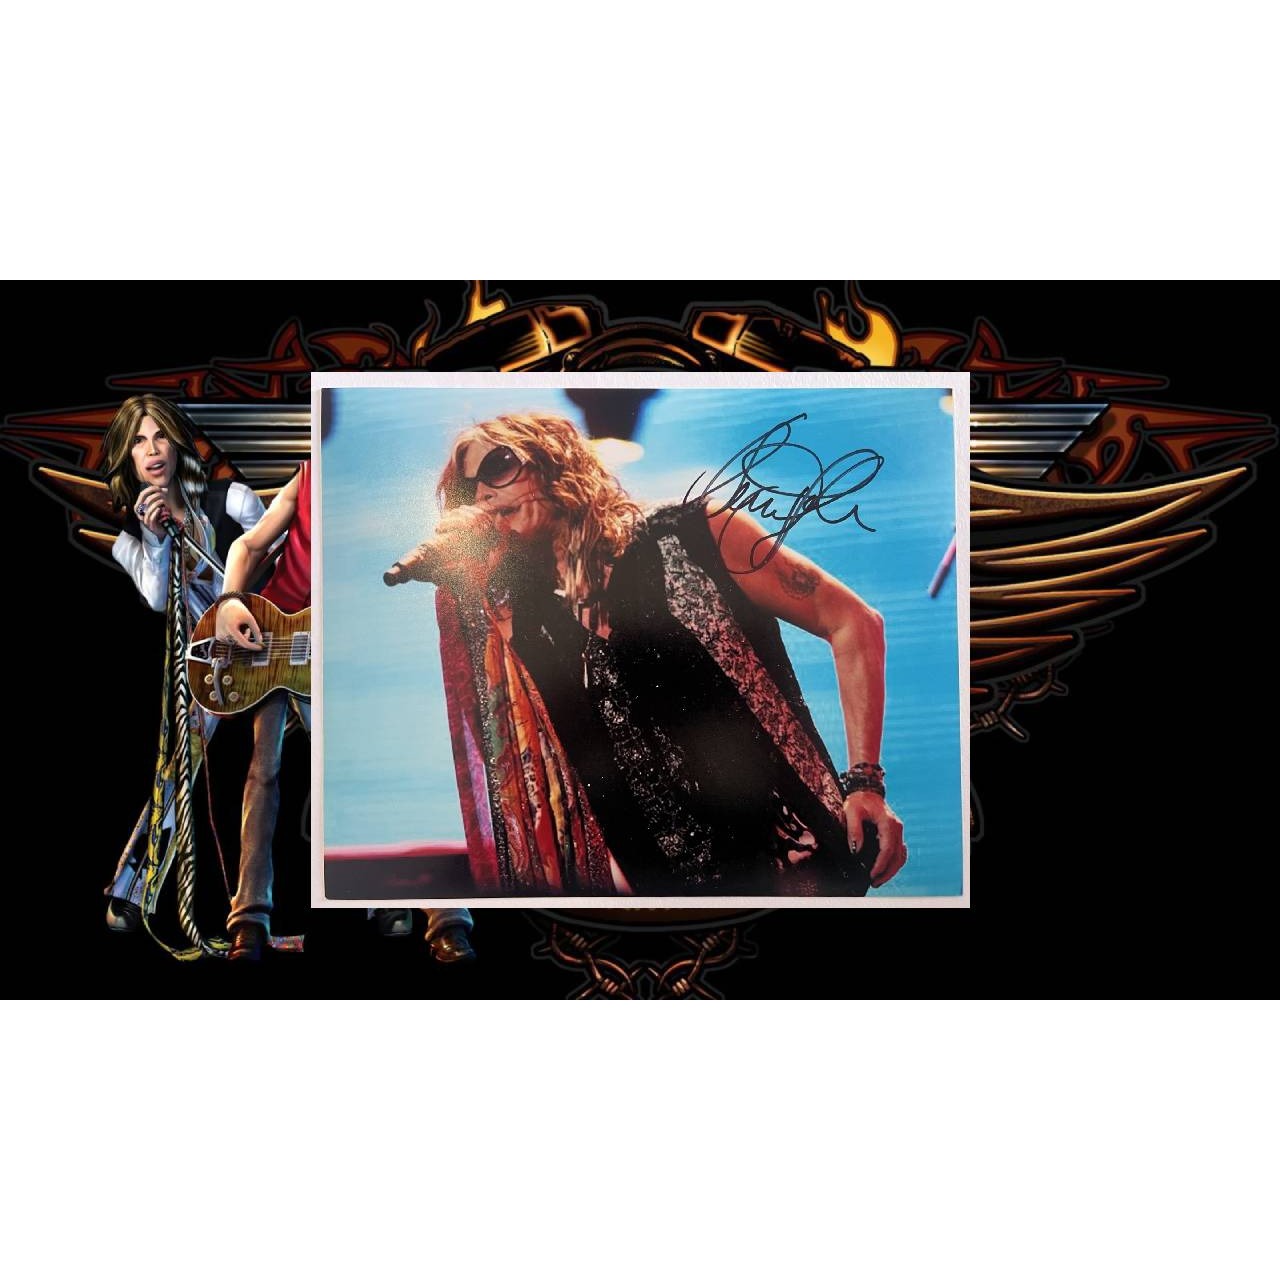 Steven Tyler of Aerosmith 8 by 10 signed photo with proof